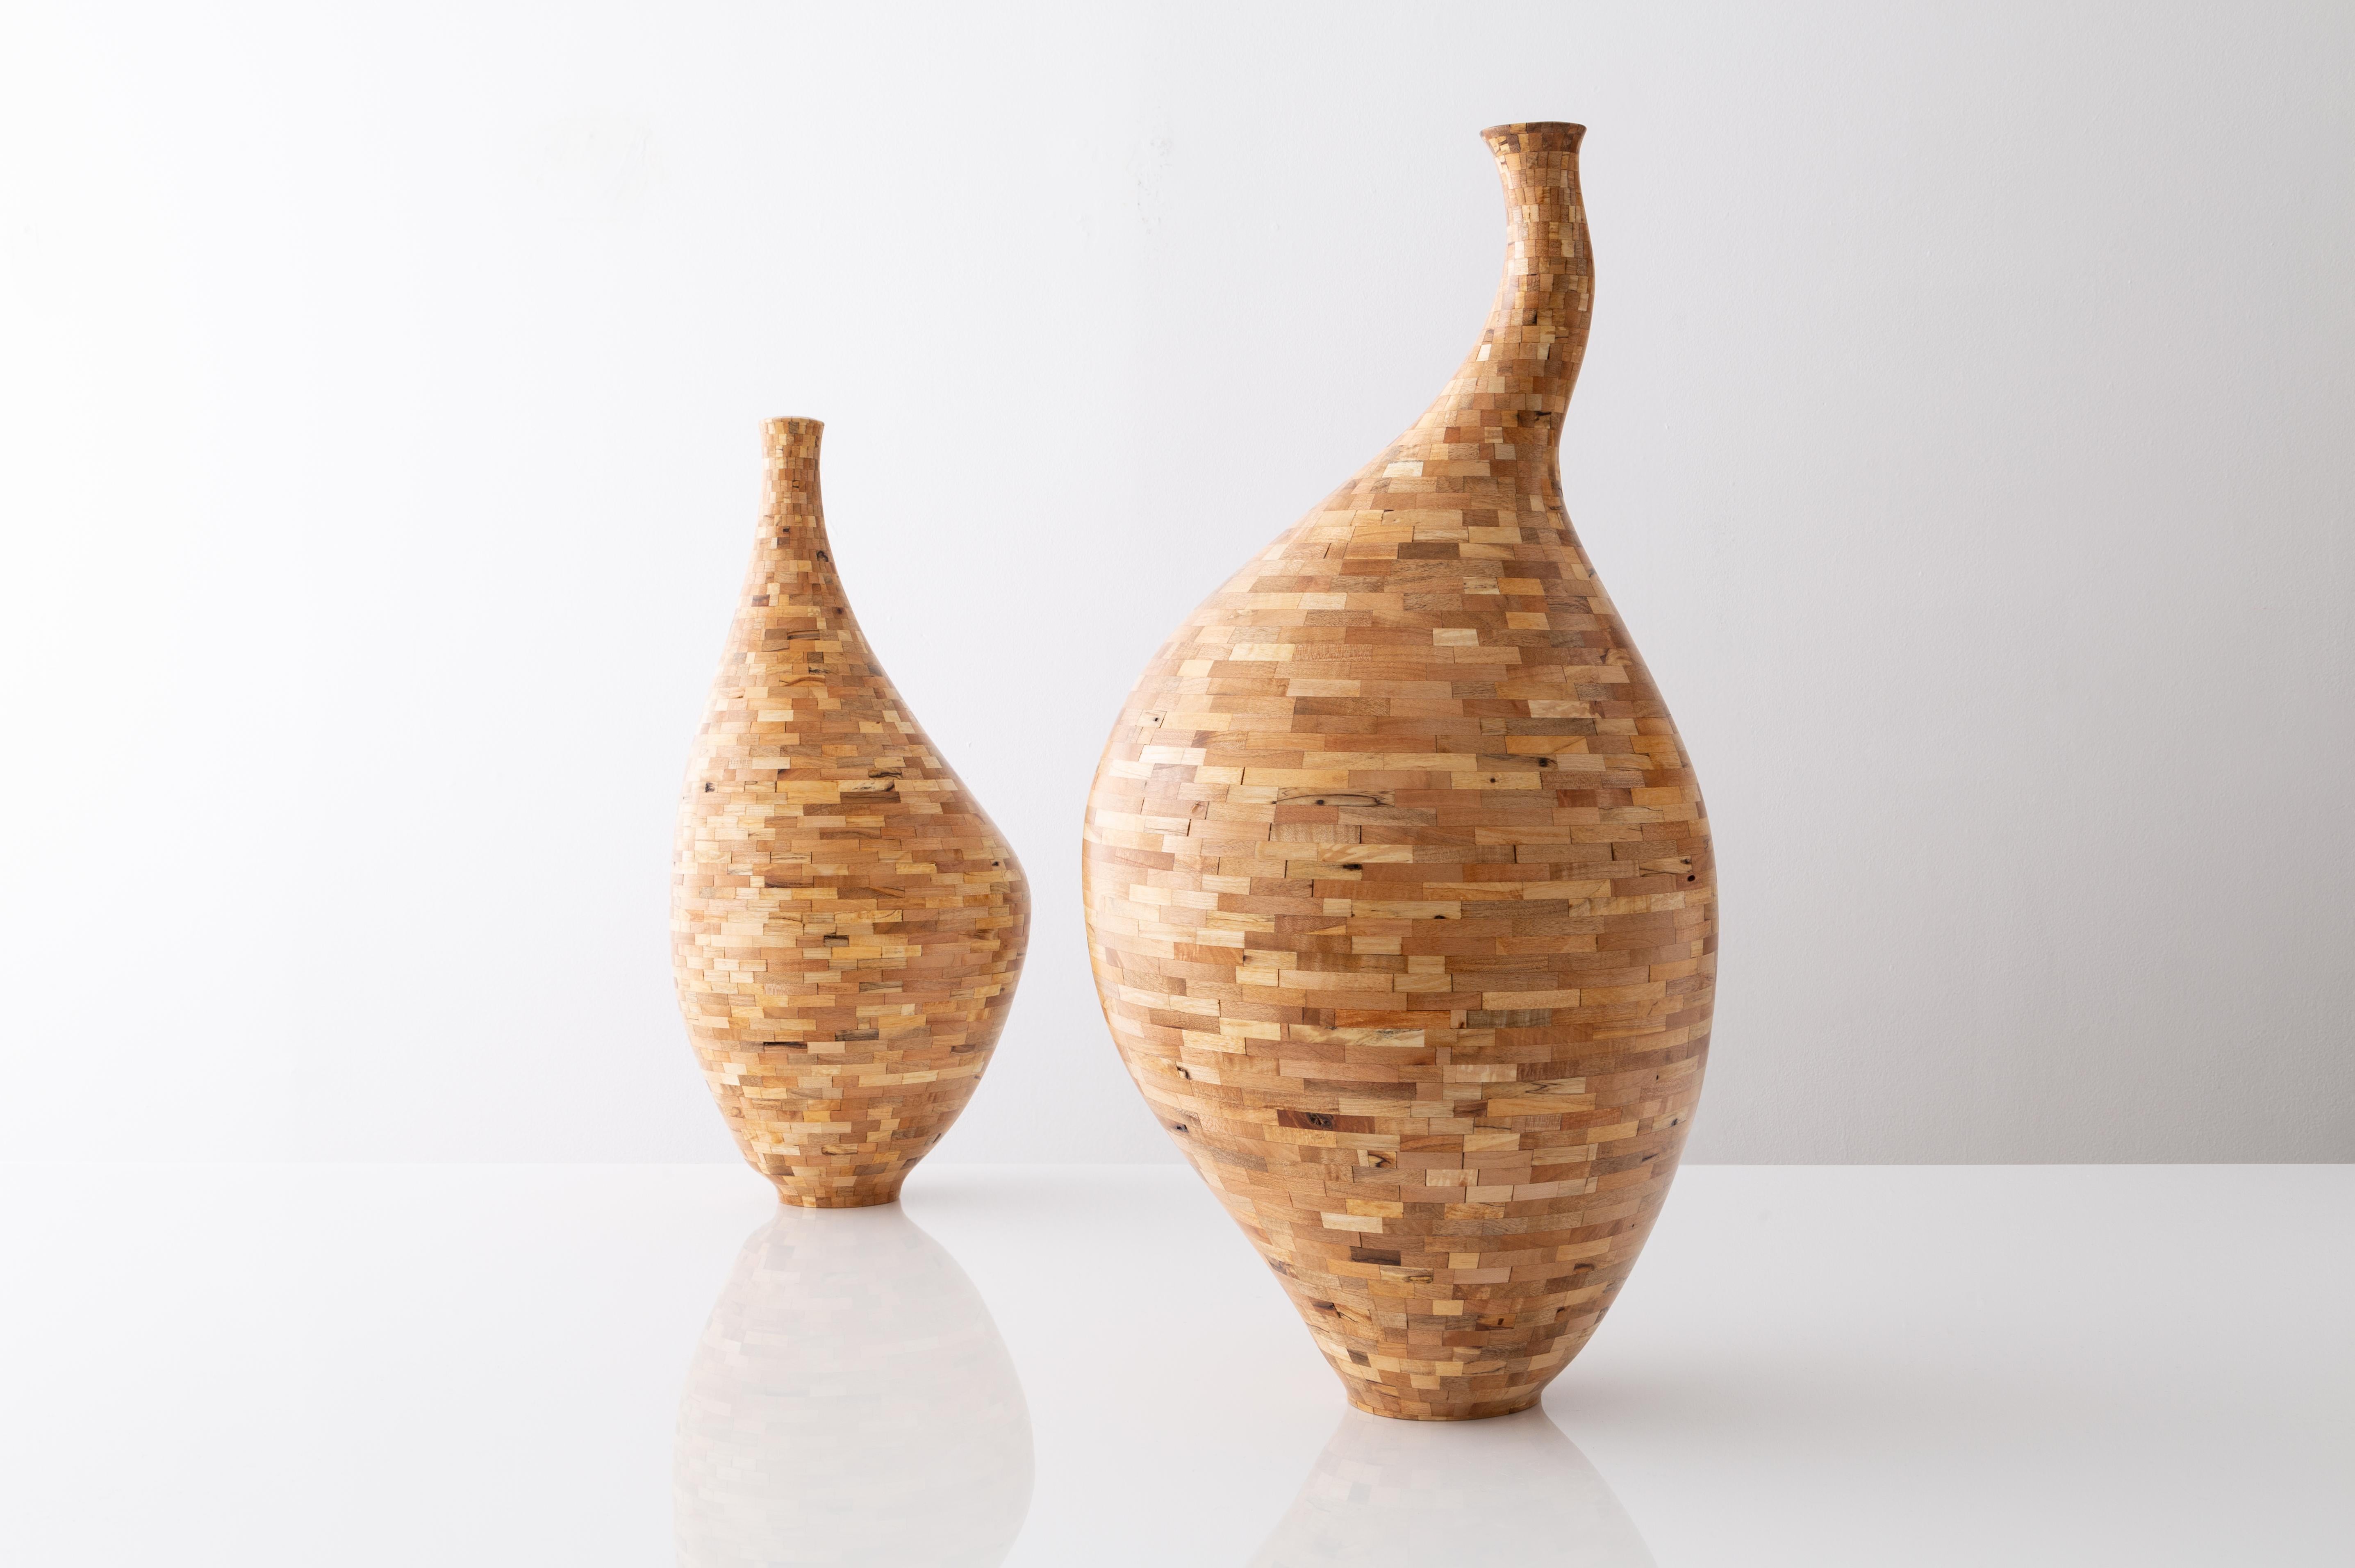 Contemporary Spalted Maple Goose Neck Vase #1 by Richard Haining, Available Now (Parkettarbeit)